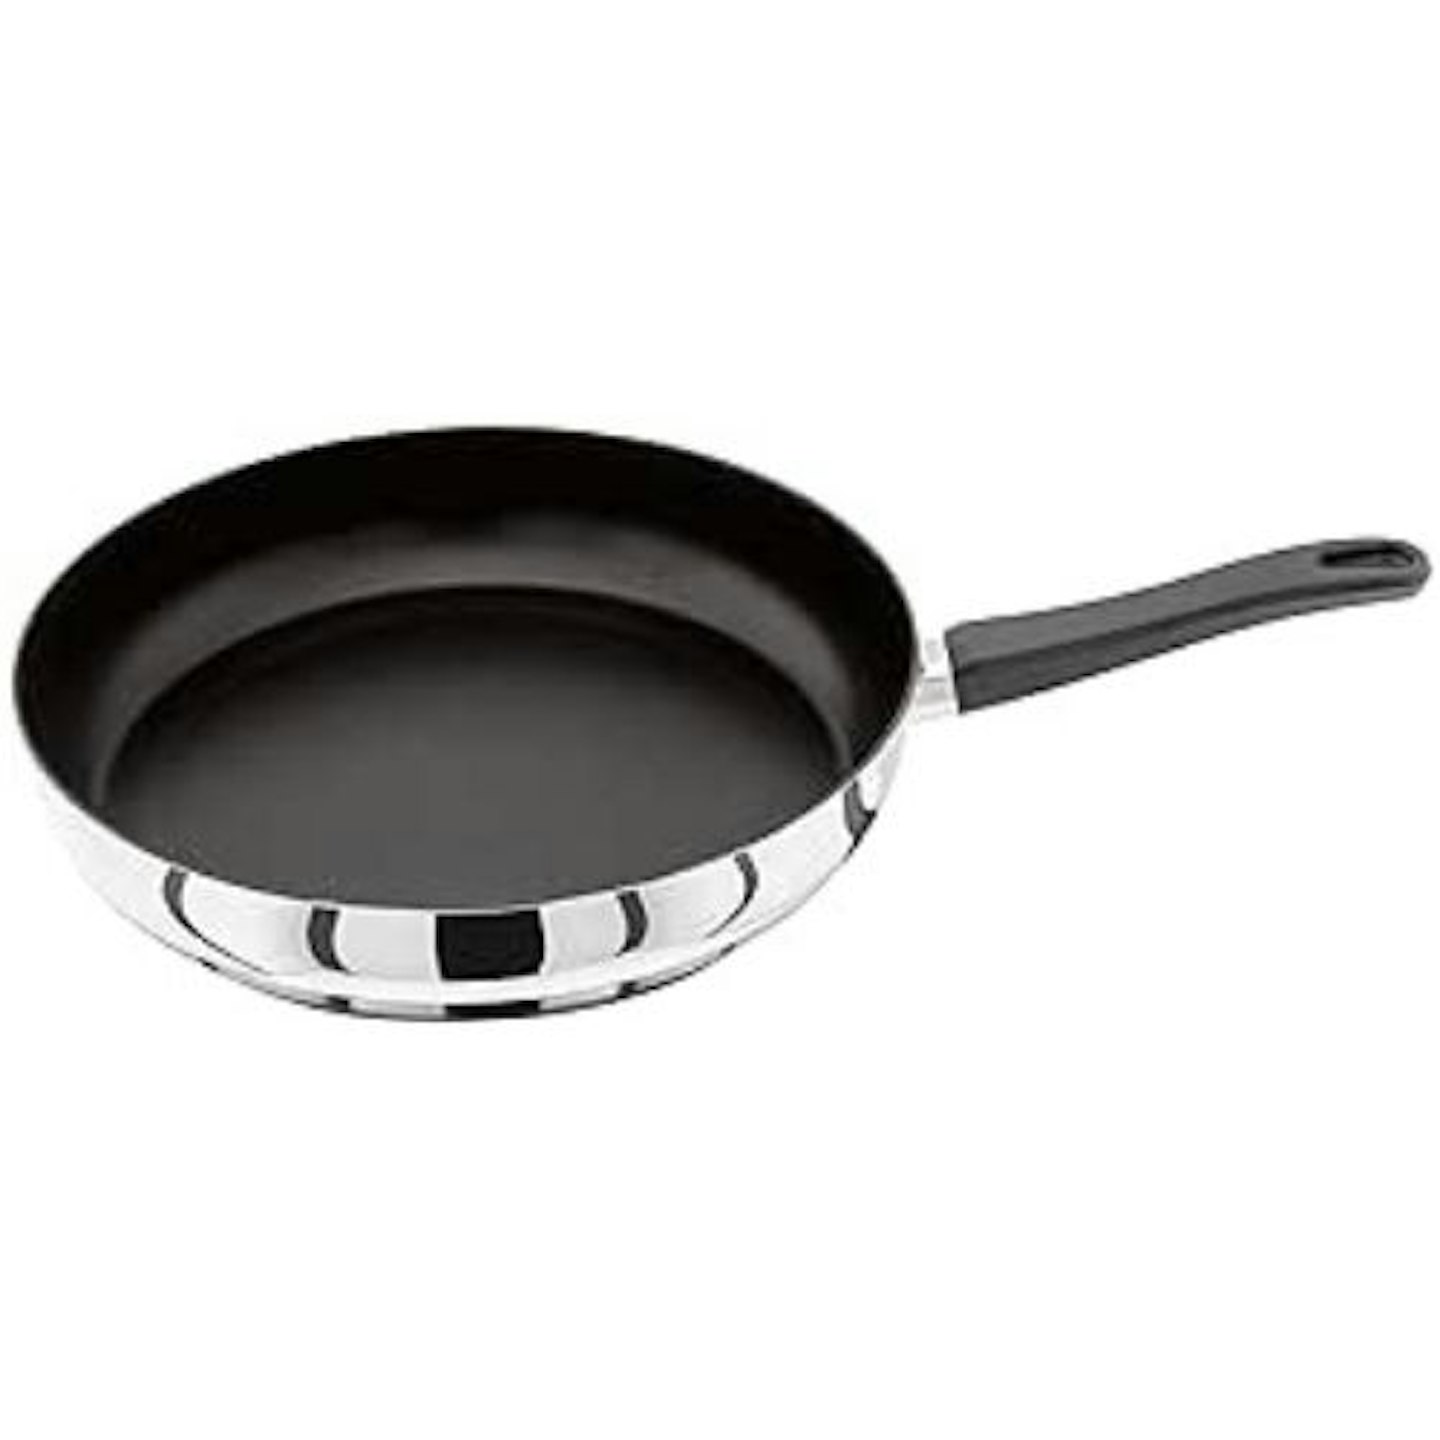 Judge Vista J227A Stainless Steel Non-Stick Large Frying Pan